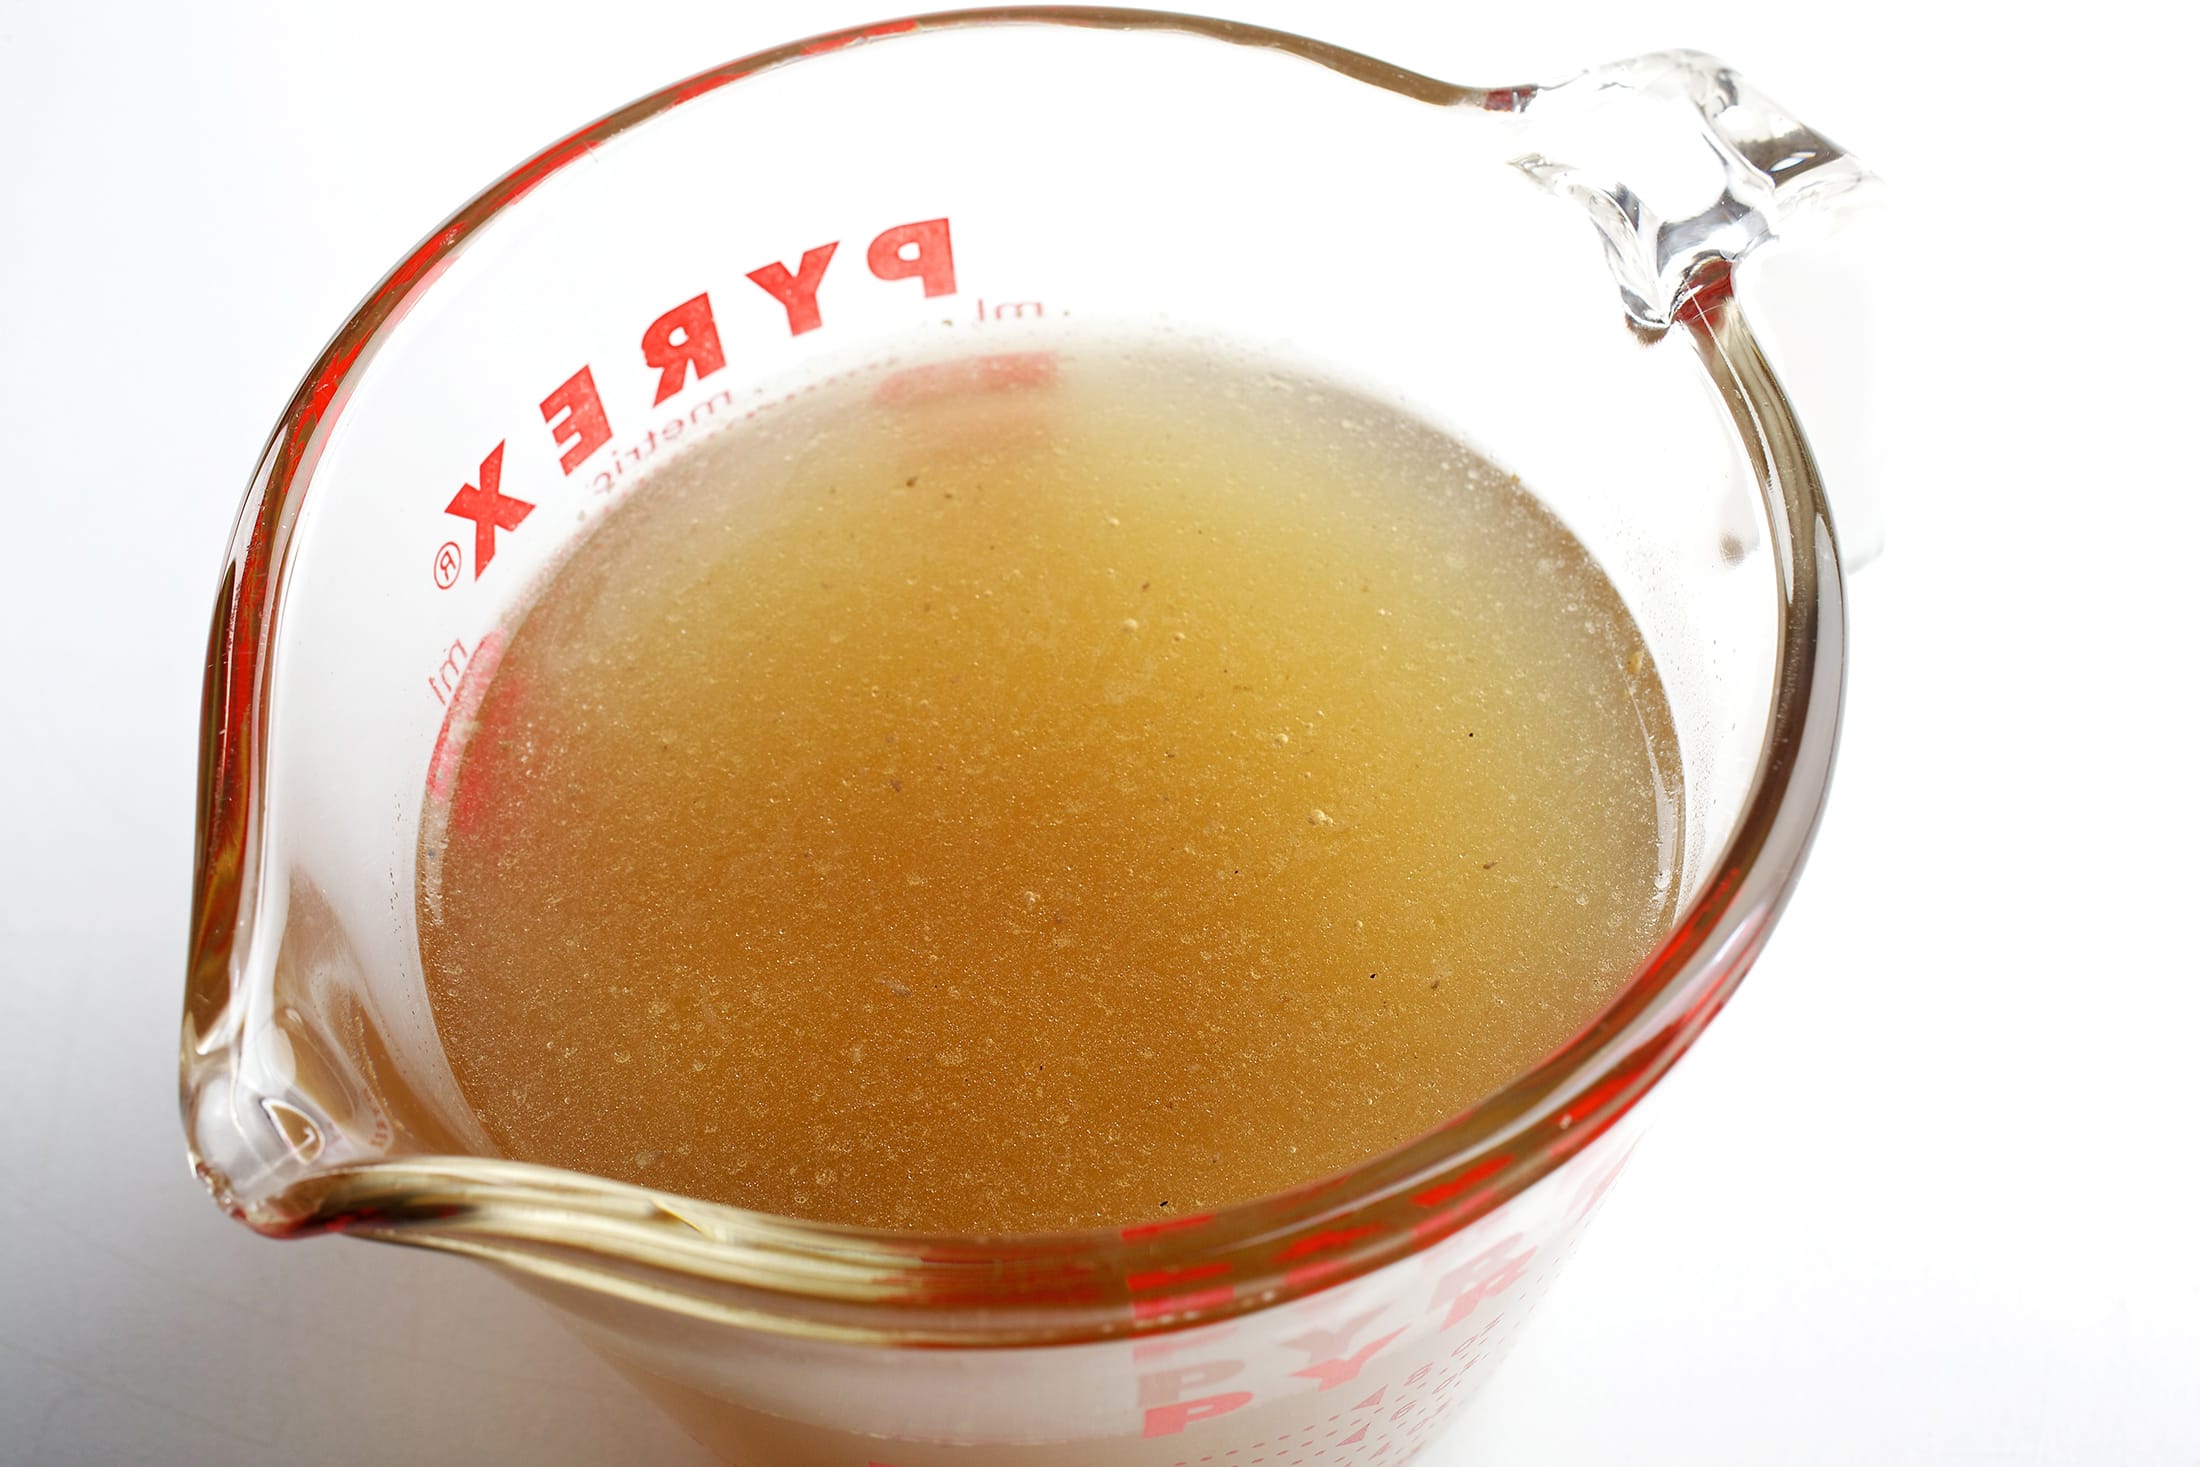 Bone broth is full of nutrients in forms that are very easy for the body to absorb.